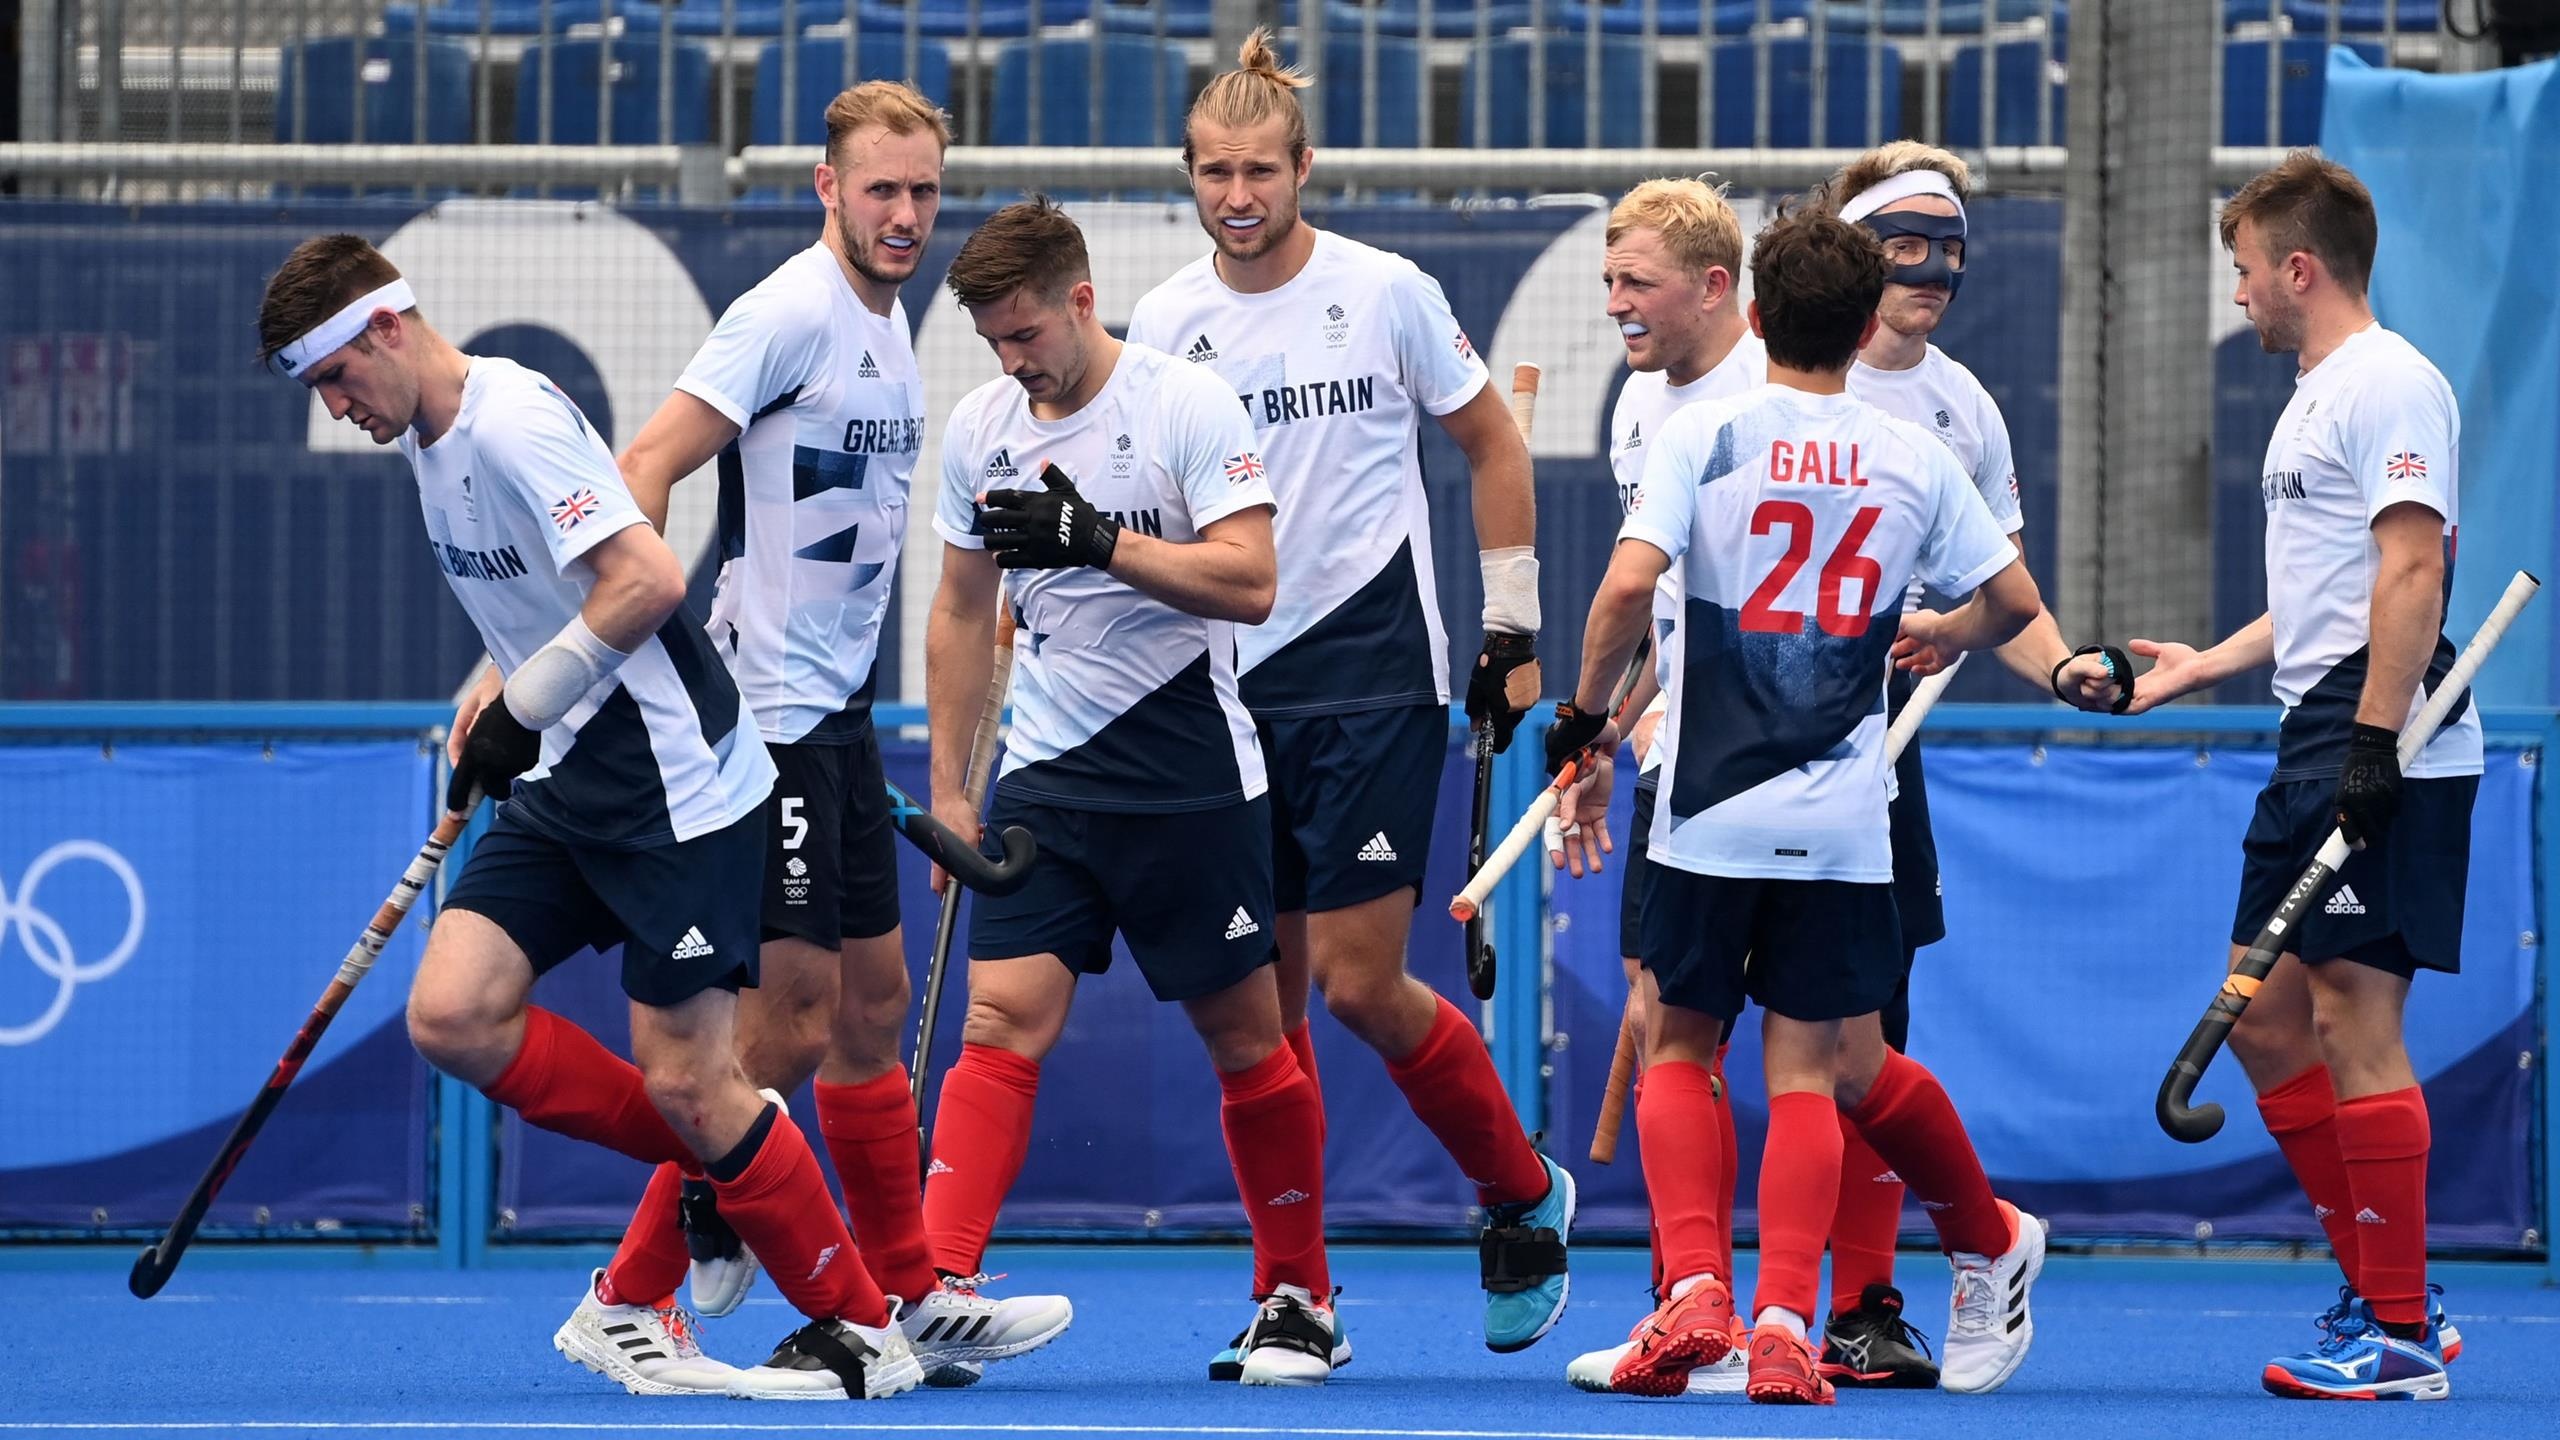 Field Hockey: The Great Britain men's national team at the 2020 Tokyo Summer Olympic Games. 2560x1440 HD Wallpaper.